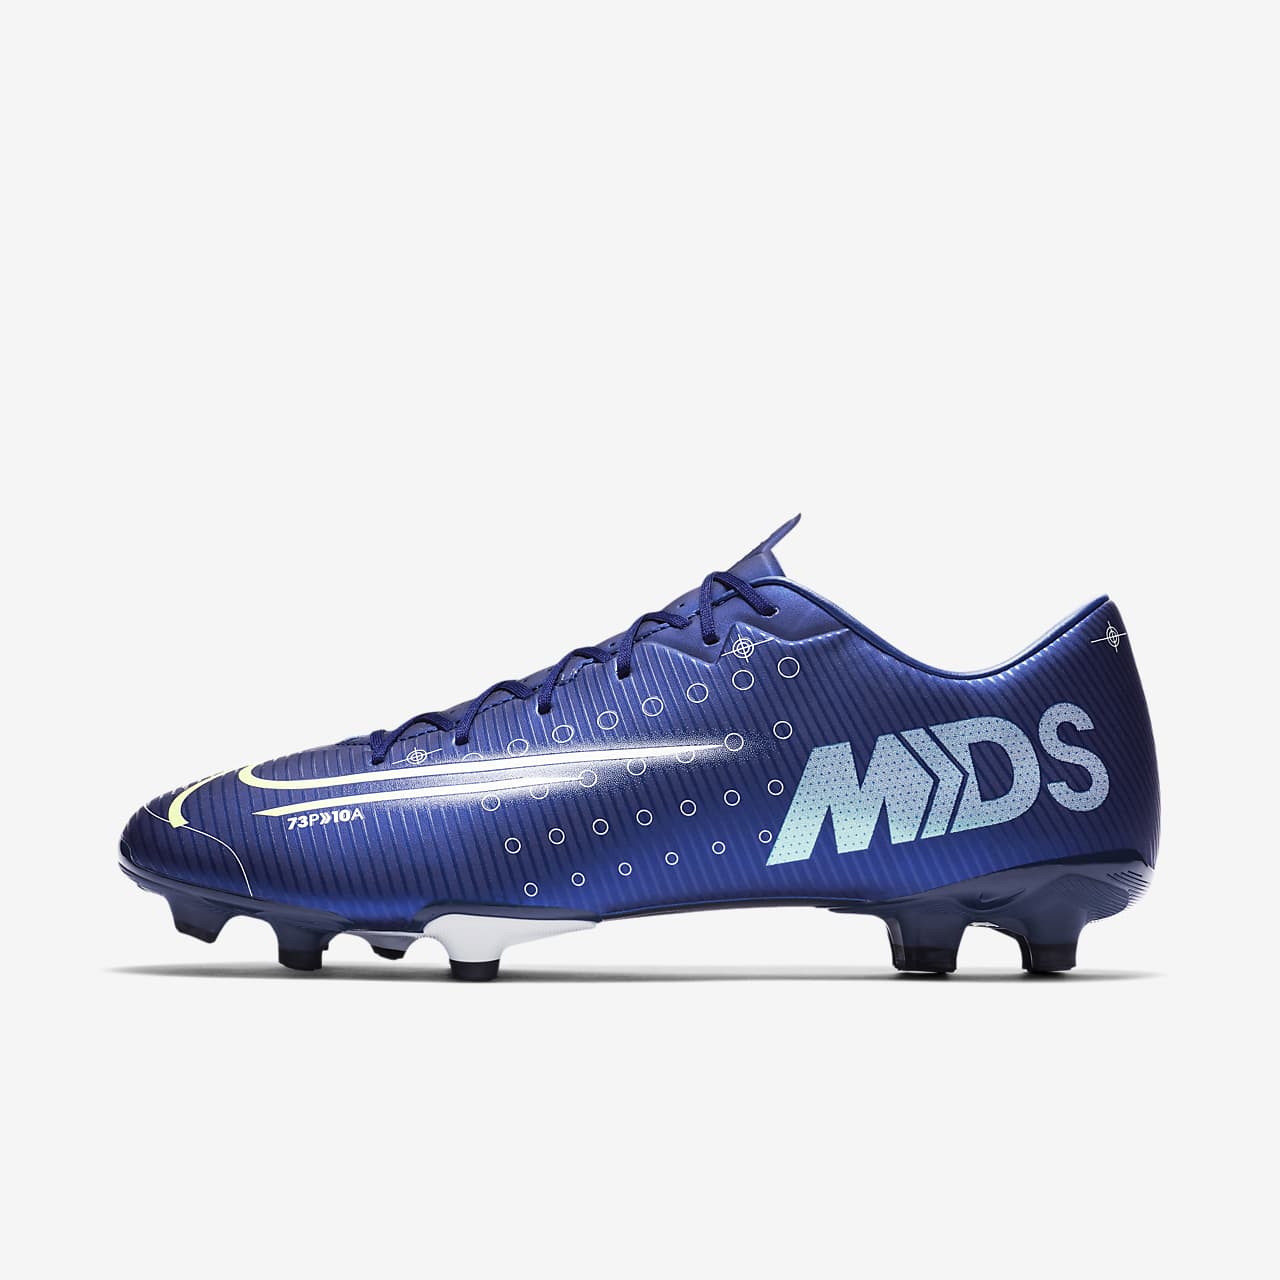 nike blue boots